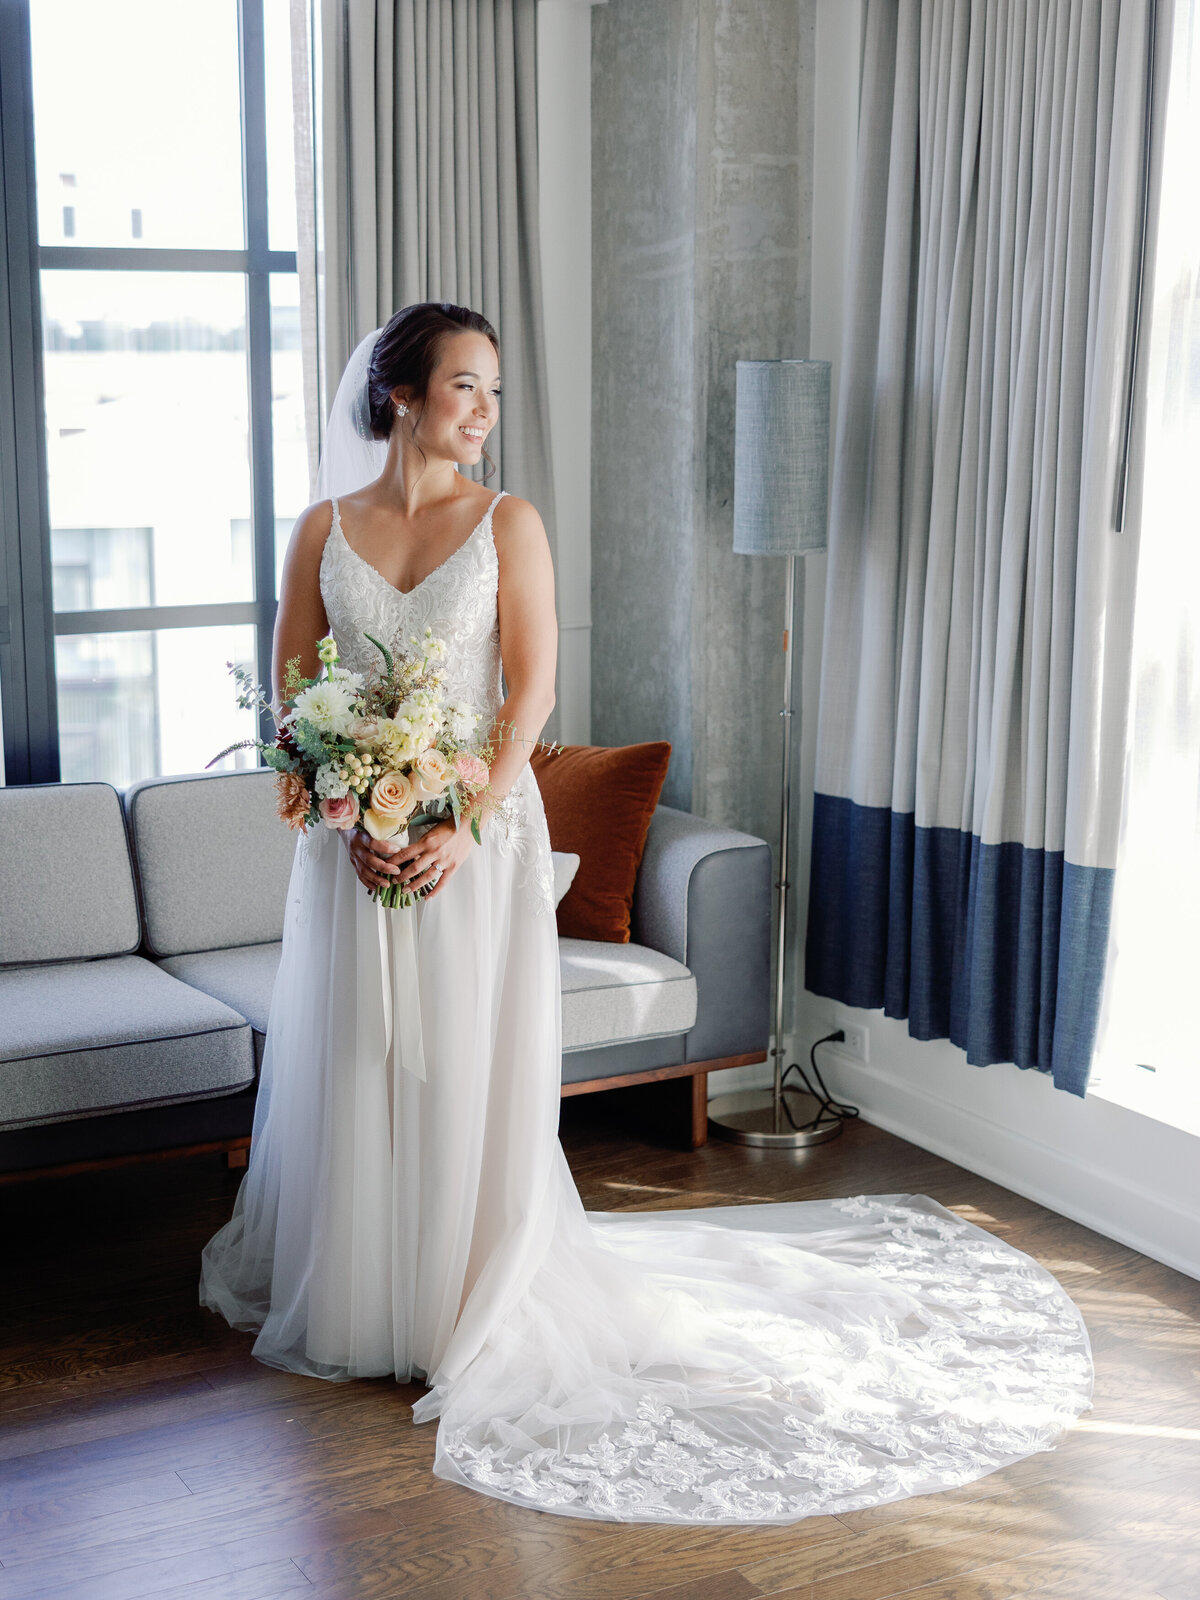 A full body portrait of the bride in her wedding dress as she holds her bouquet at her waist